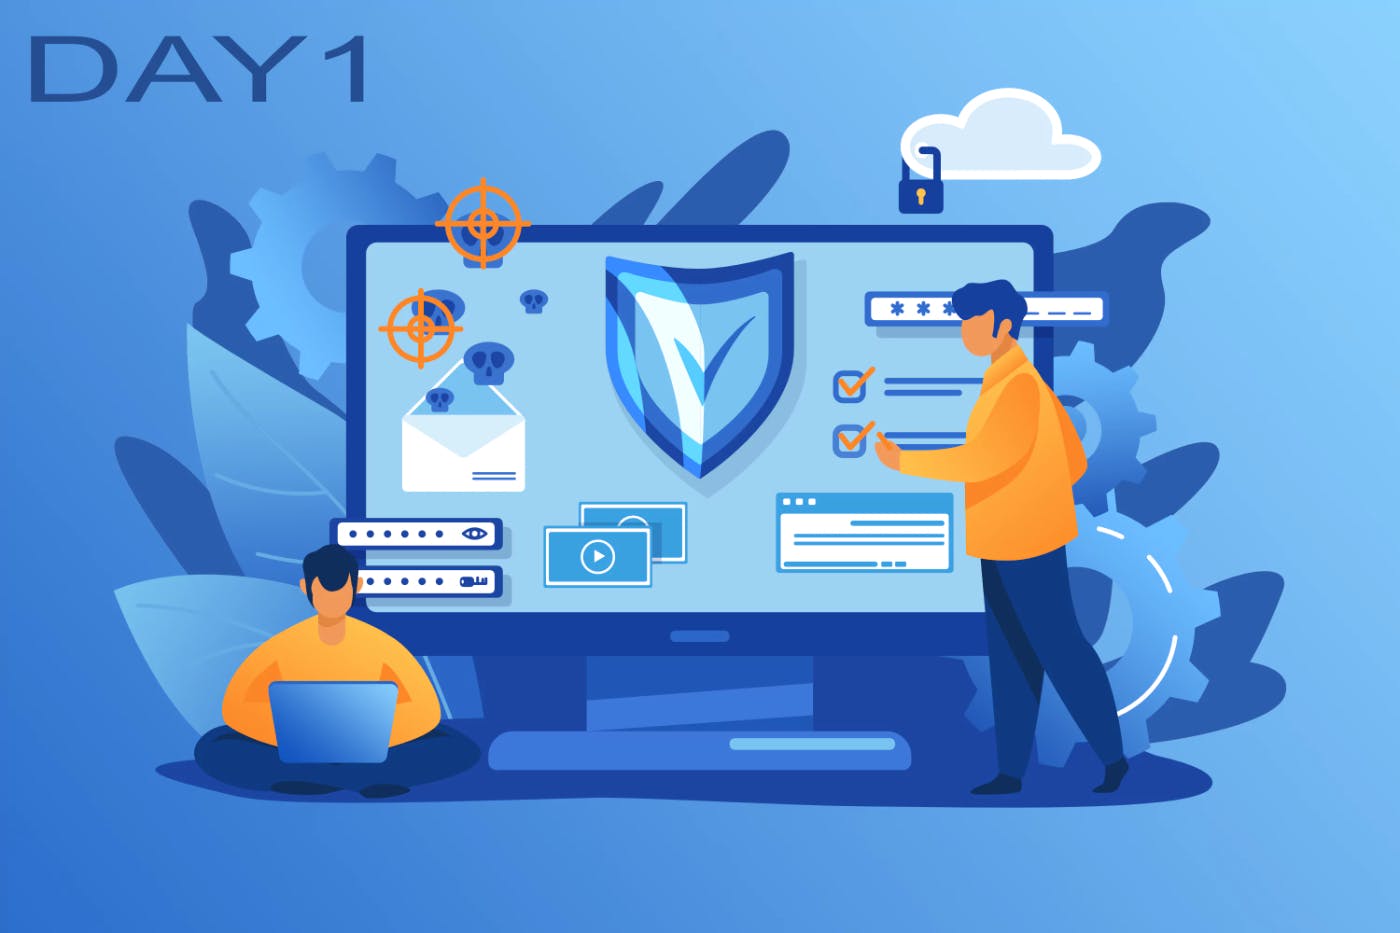 /how-to-level-up-your-code-and-your-security-day-1-demystifying-cybersecurity feature image